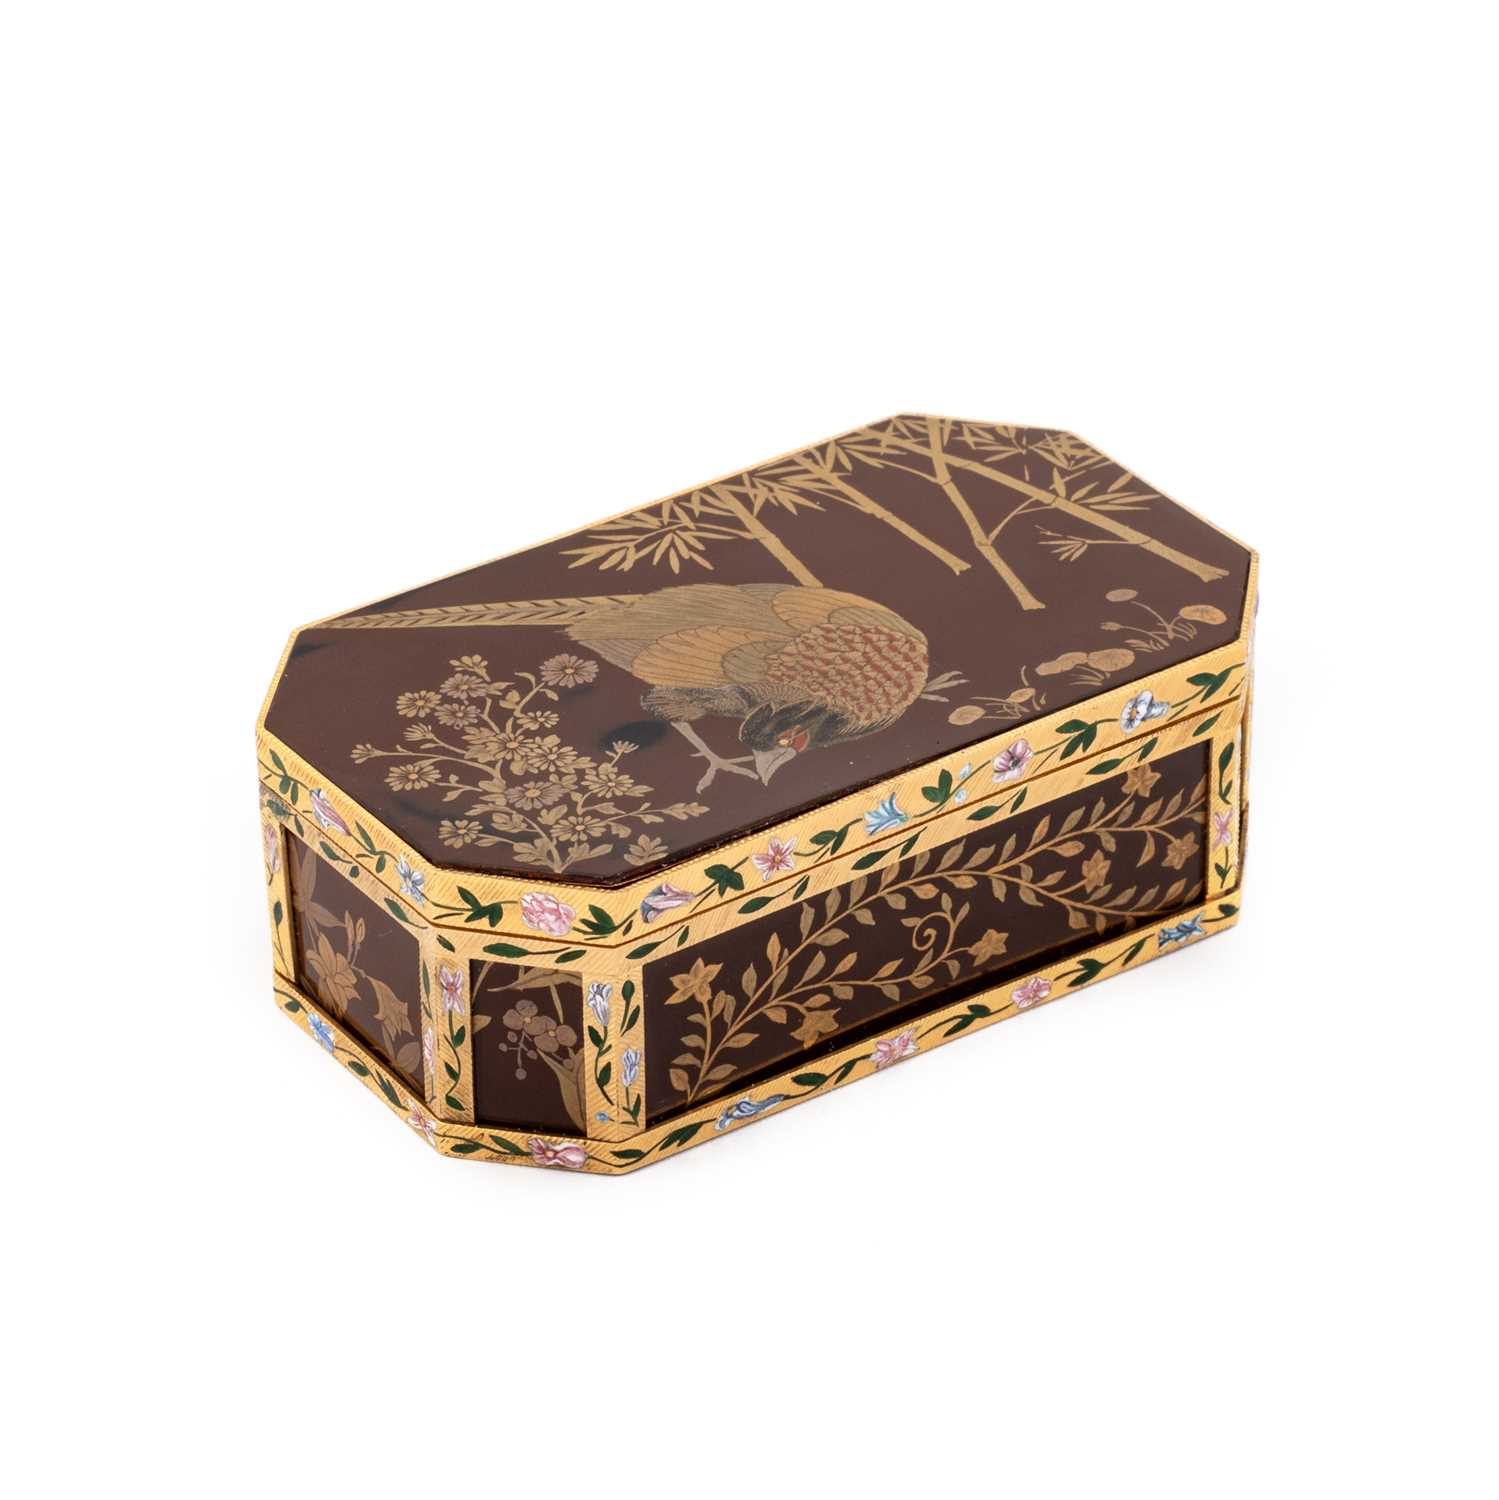 Lot 548 - A FINE FRENCH GOLD-MOUNTED, ENAMEL AND JAPANESE LACQUER BOX, POSSIBLY BY JEAN DUCROLLAY